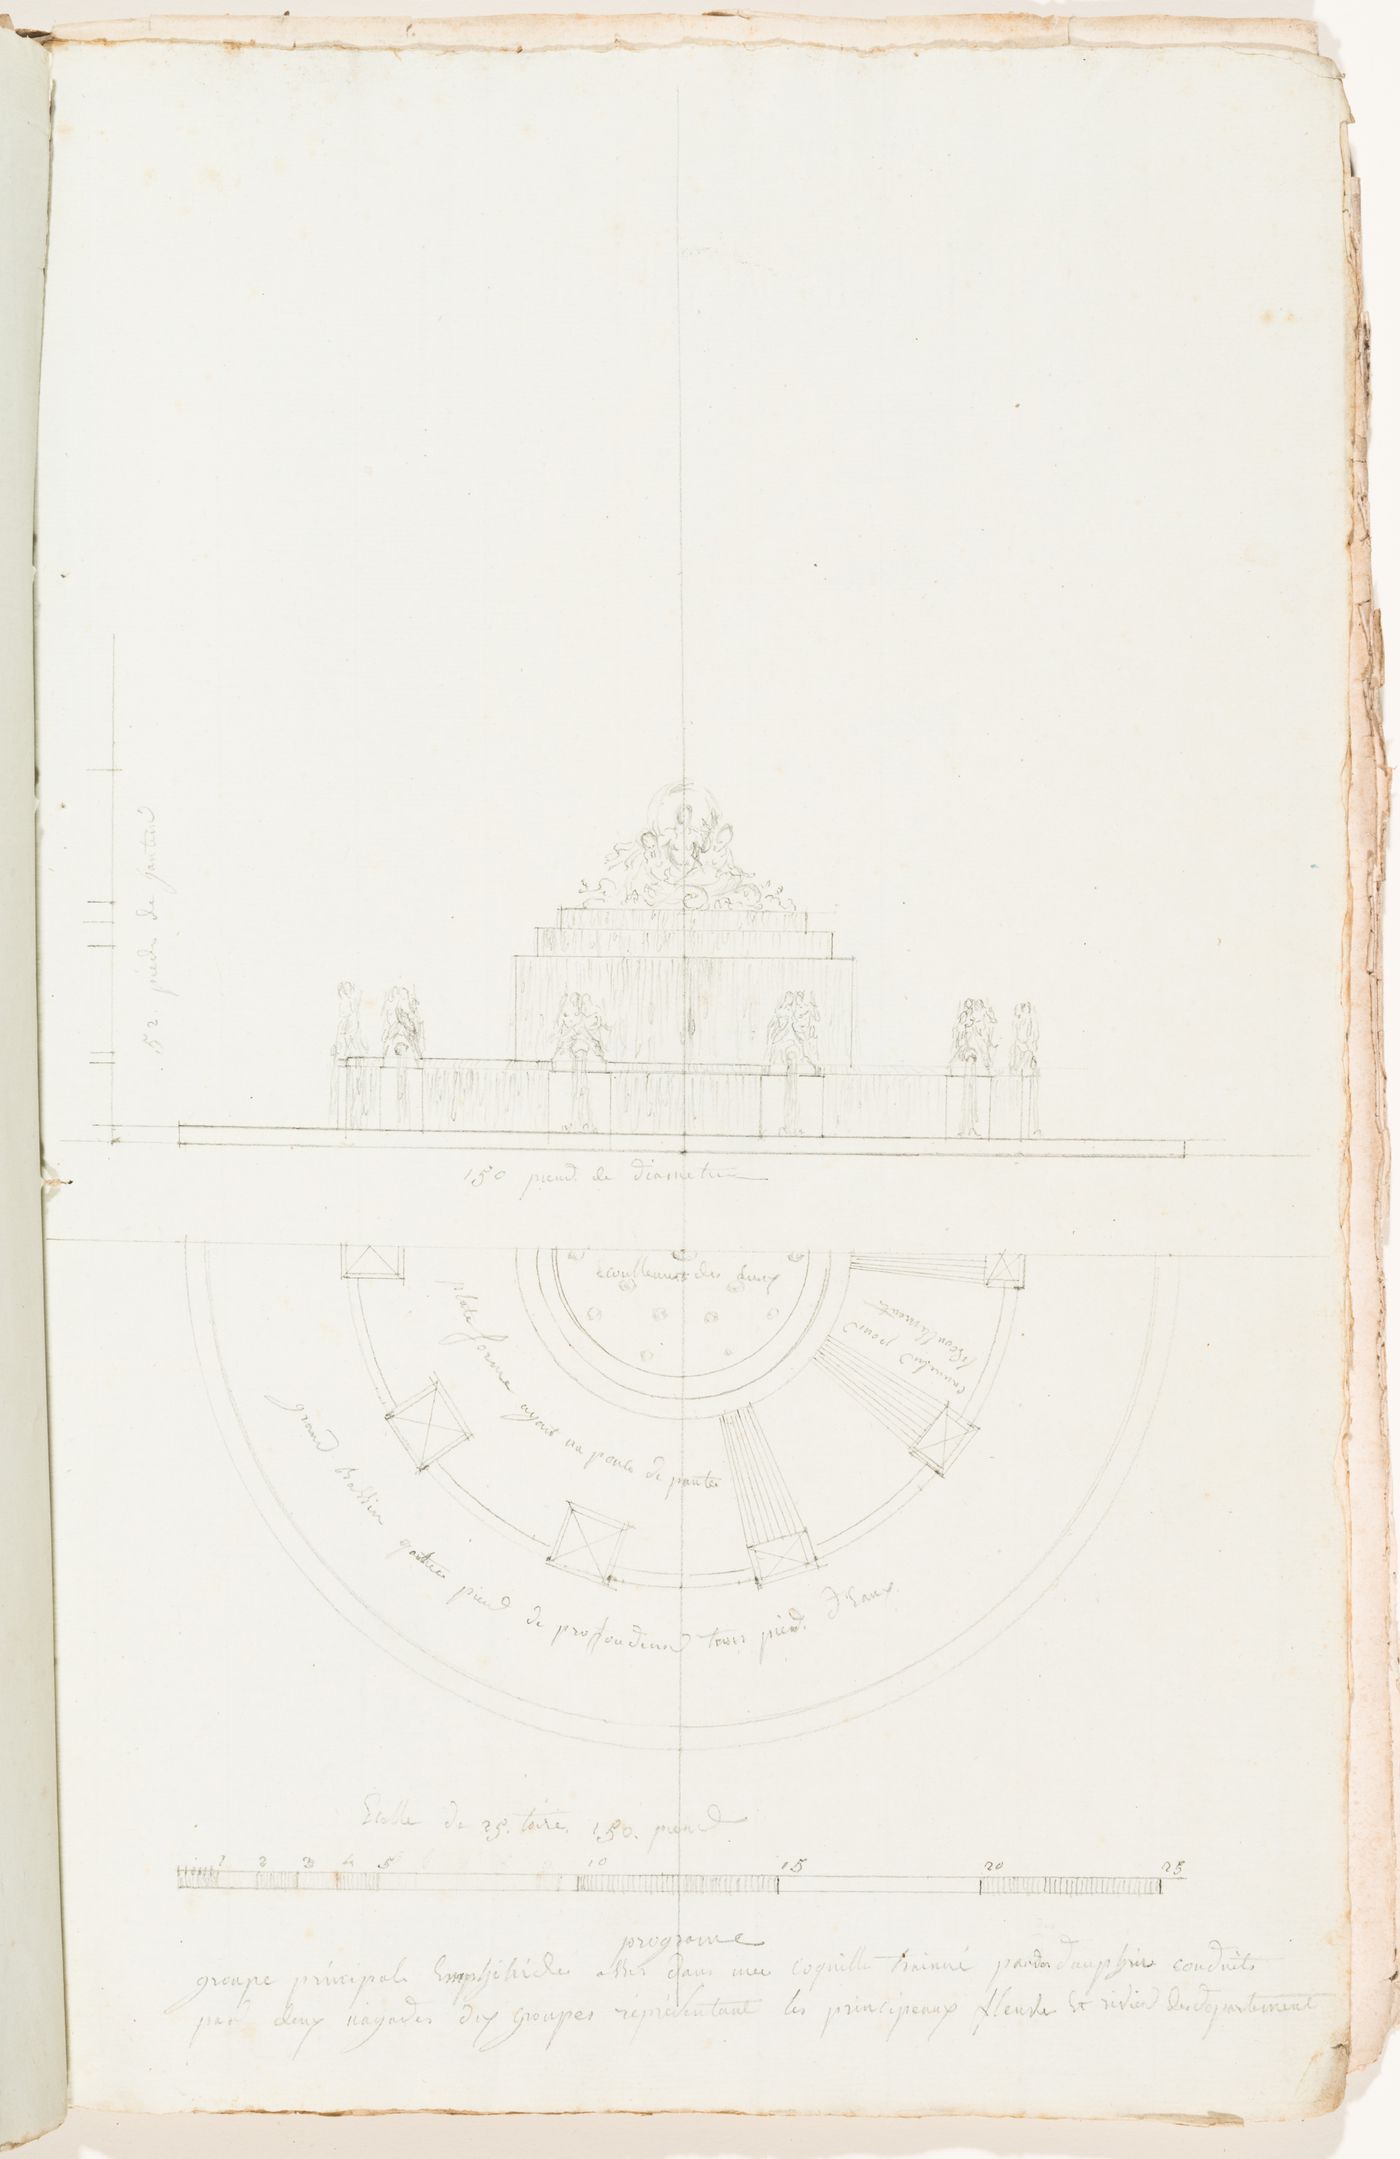 Conceptual sketch elevation and half plan for a two-tiered fountain with a central sculpture